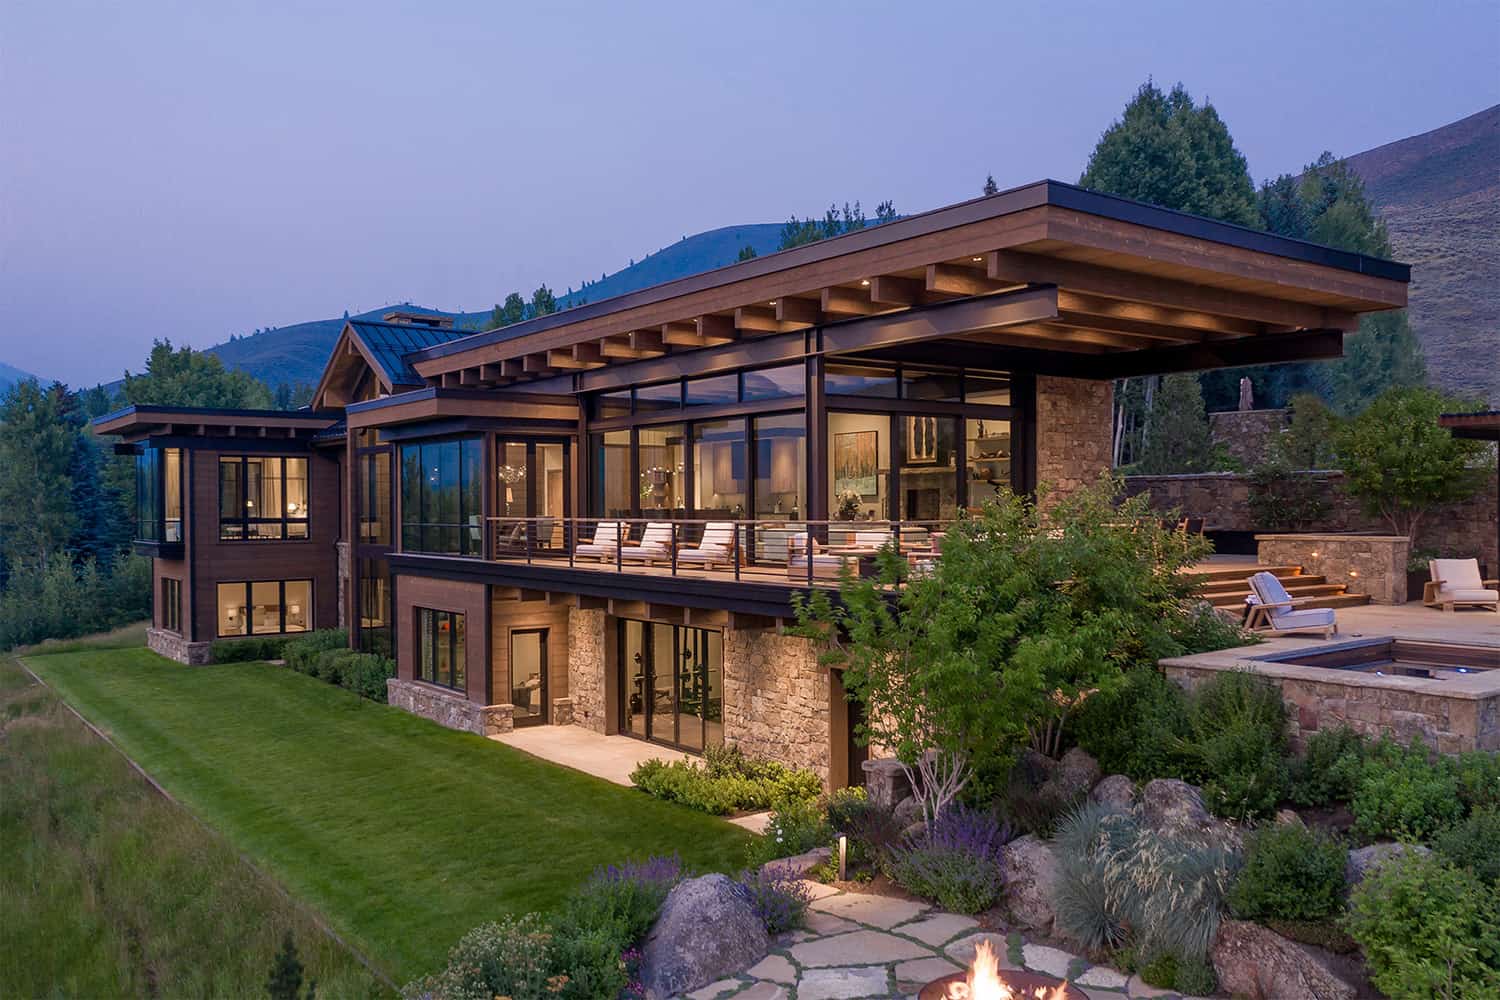 Step into this breathtaking Sun Valley mountain house wrapped in beauty